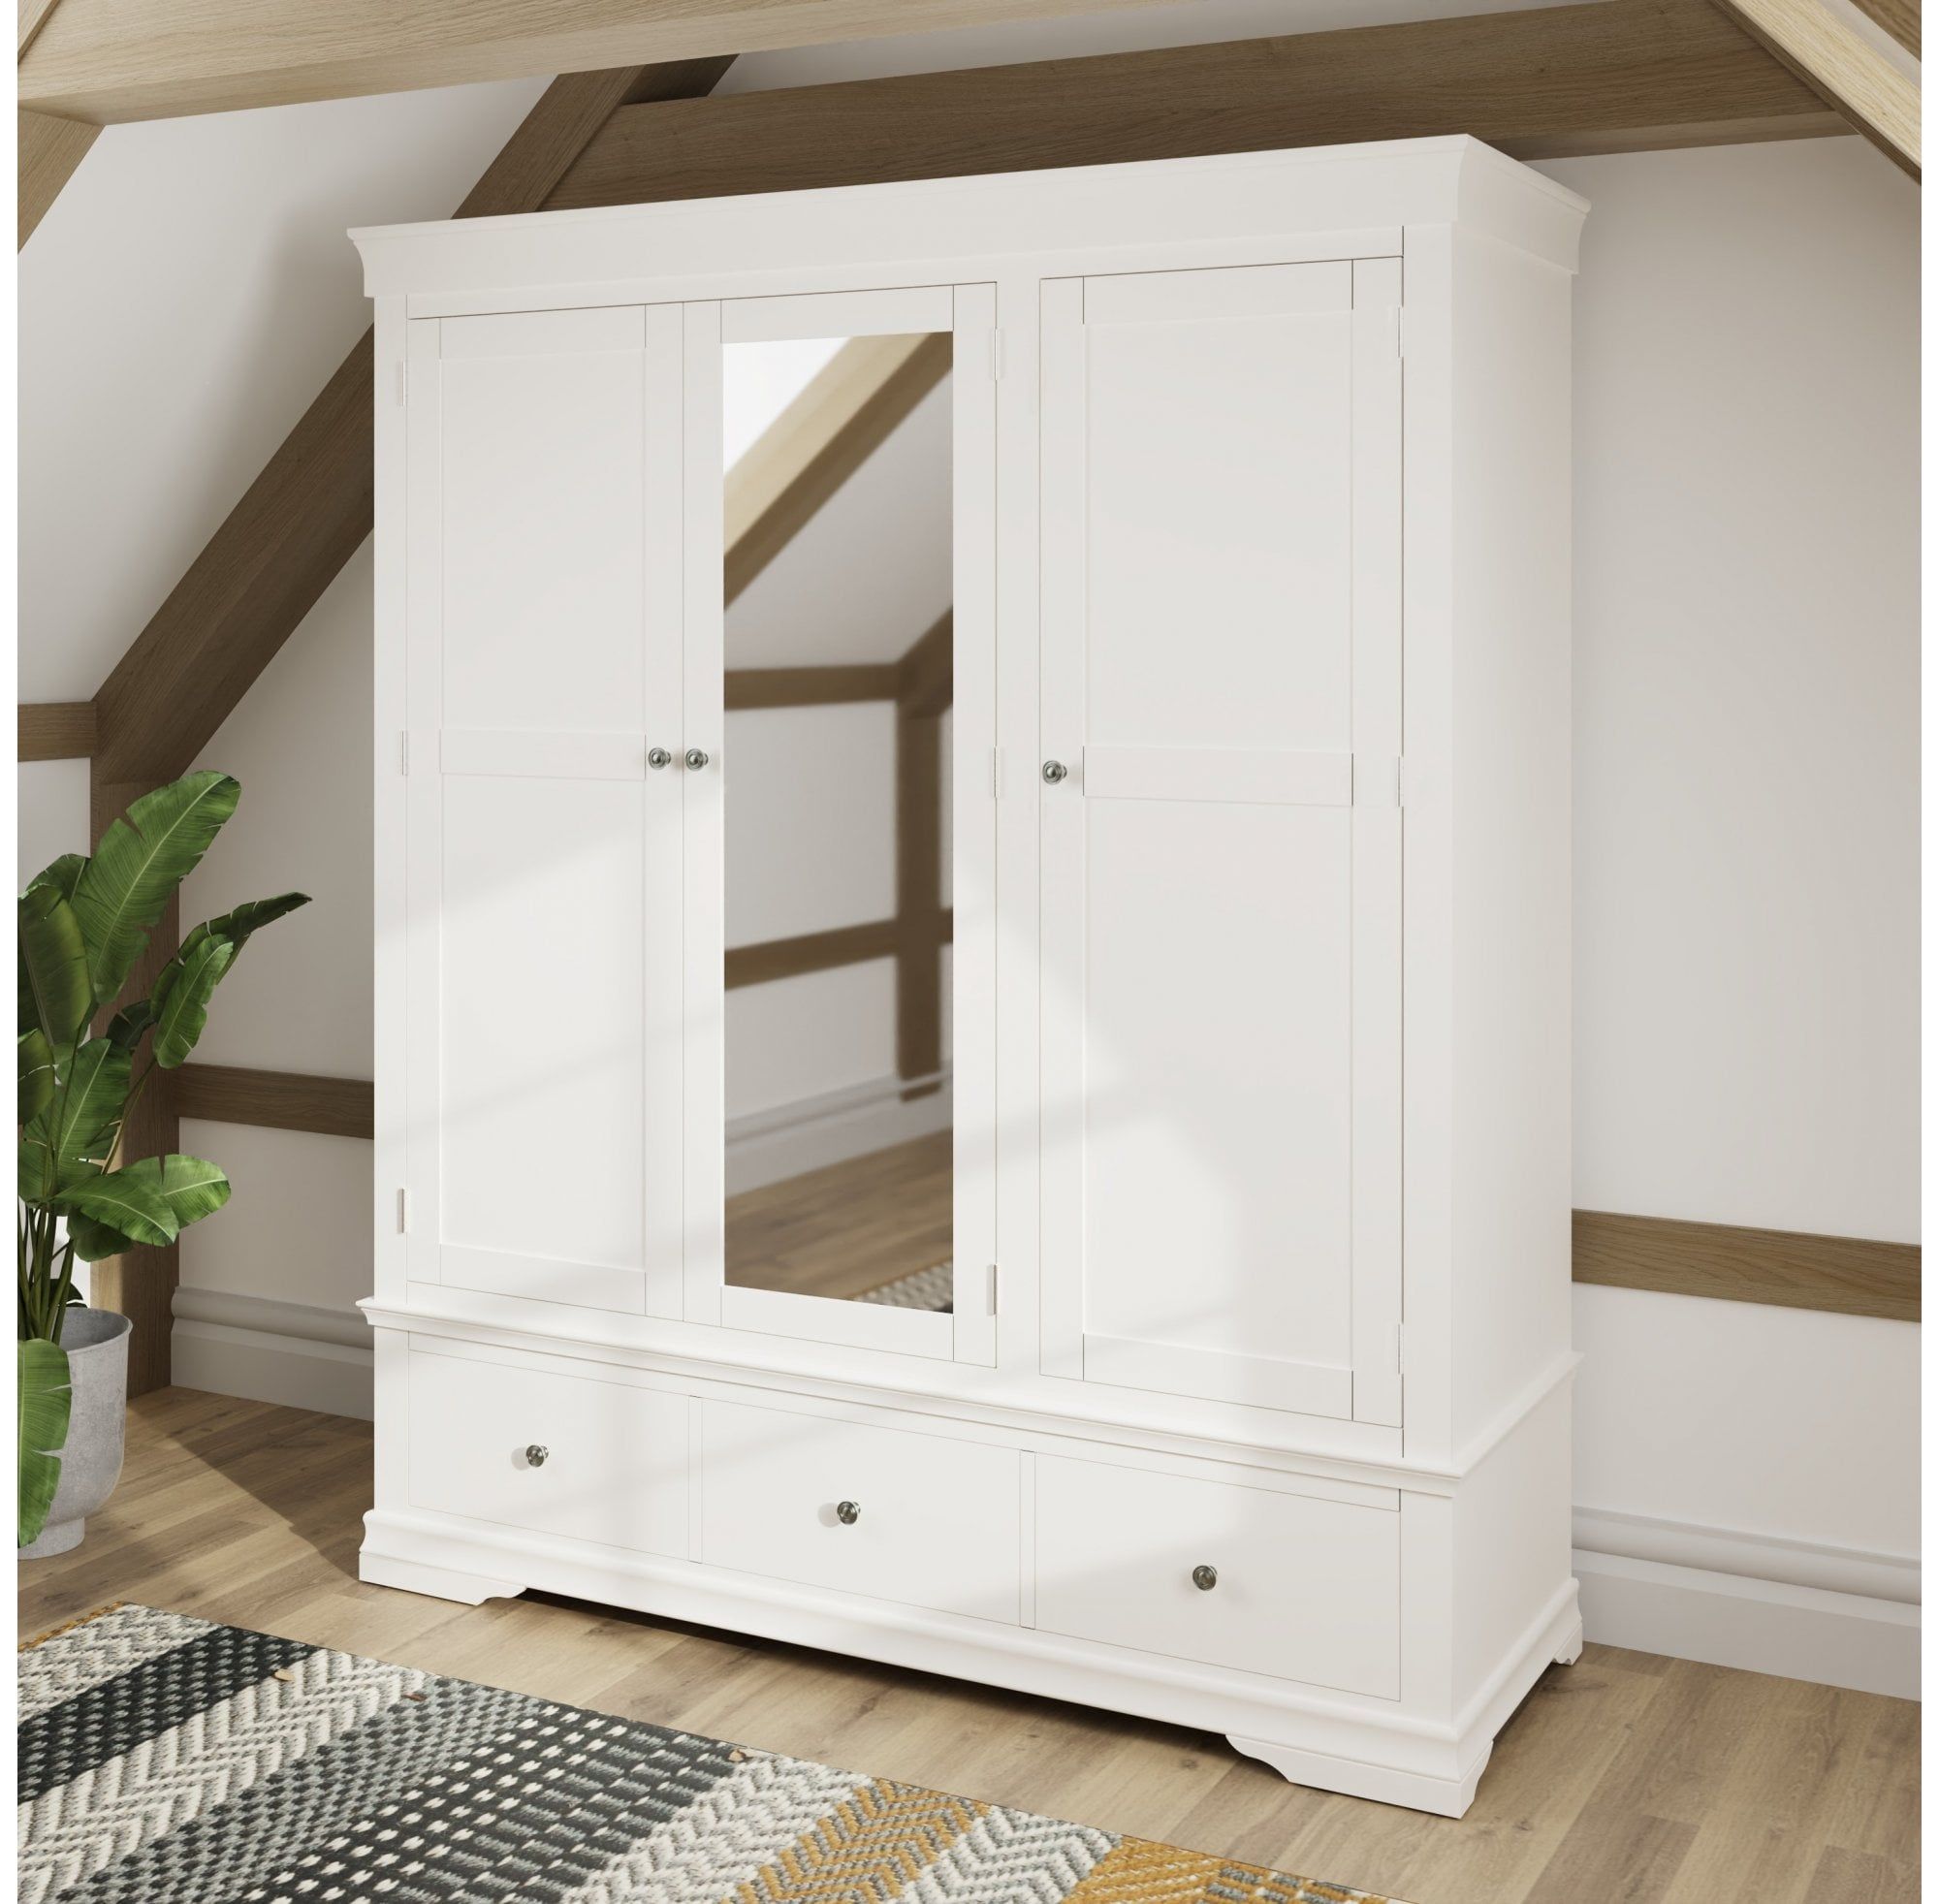 Whitecliff White 3 Door 3 Drawer Wardrobe – Furniture From Readers  Interiors Uk Intended For White 3 Door Wardrobes With Drawers (View 10 of 15)